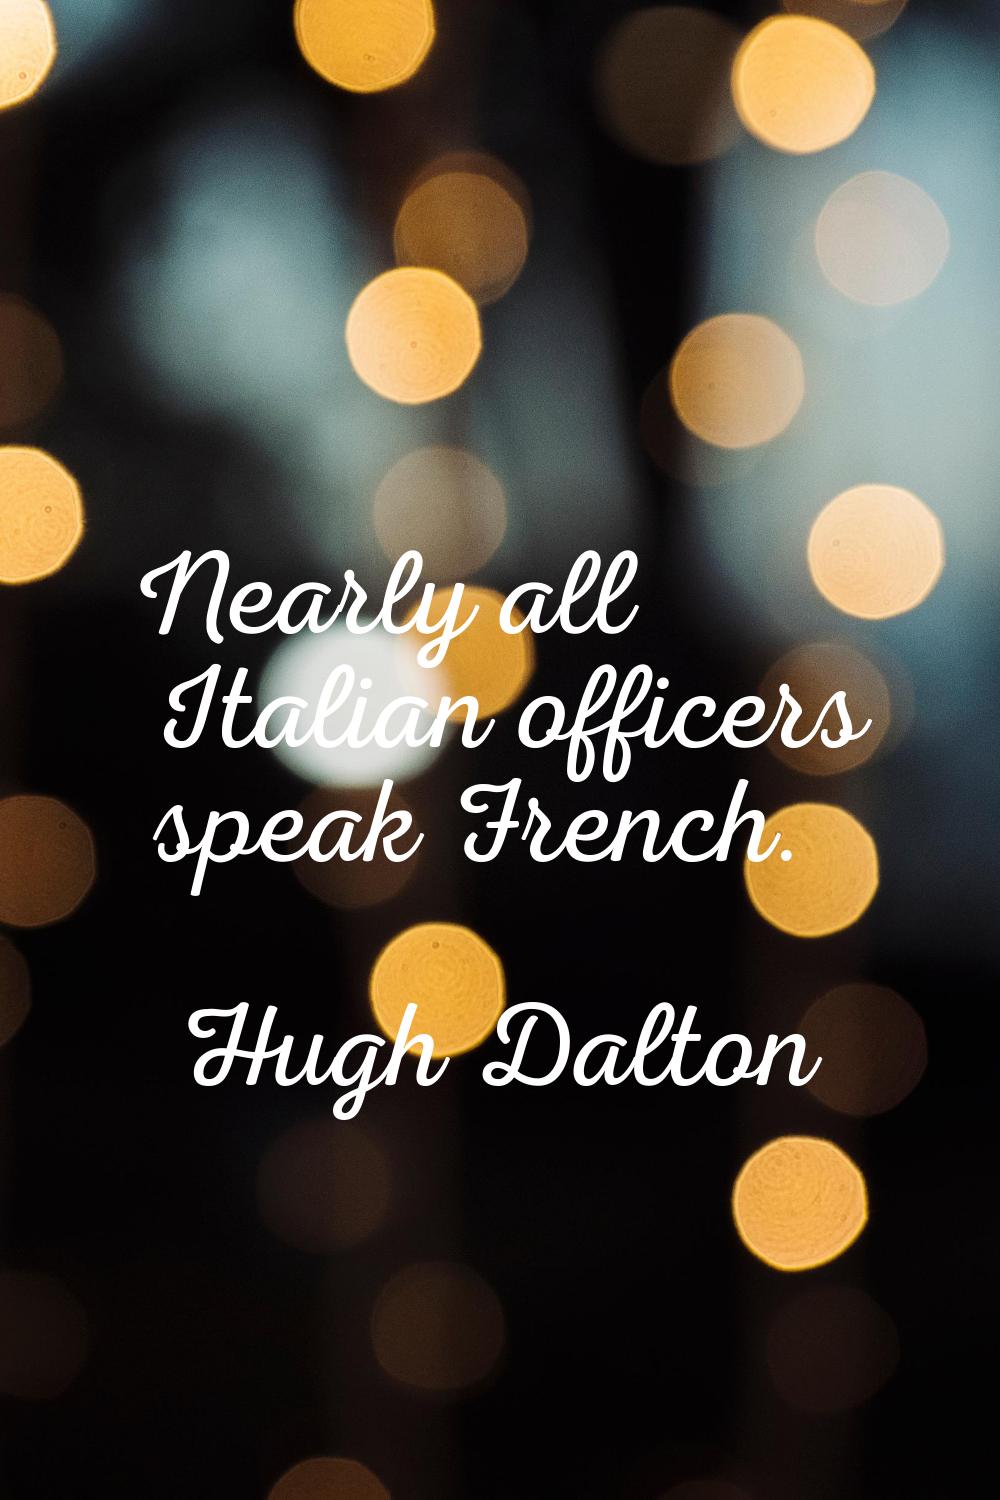 Nearly all Italian officers speak French.